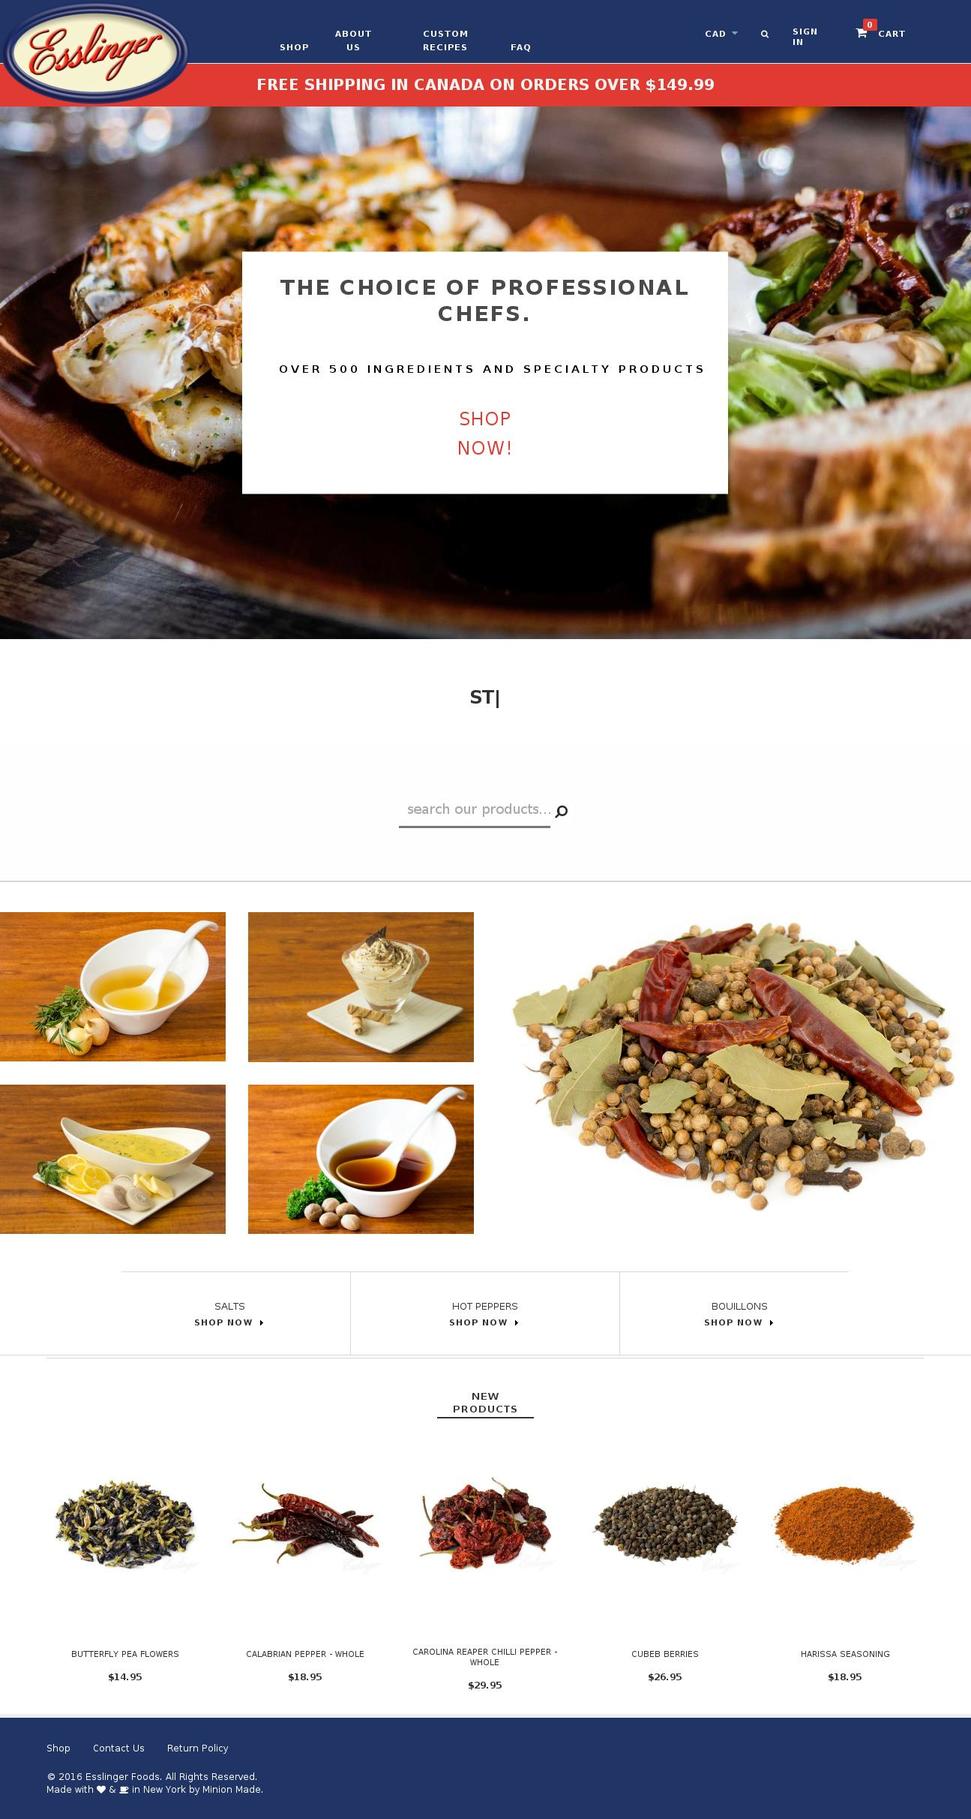 Made With ❤ By Minion Made Shopify theme site example esslingerfoods.com